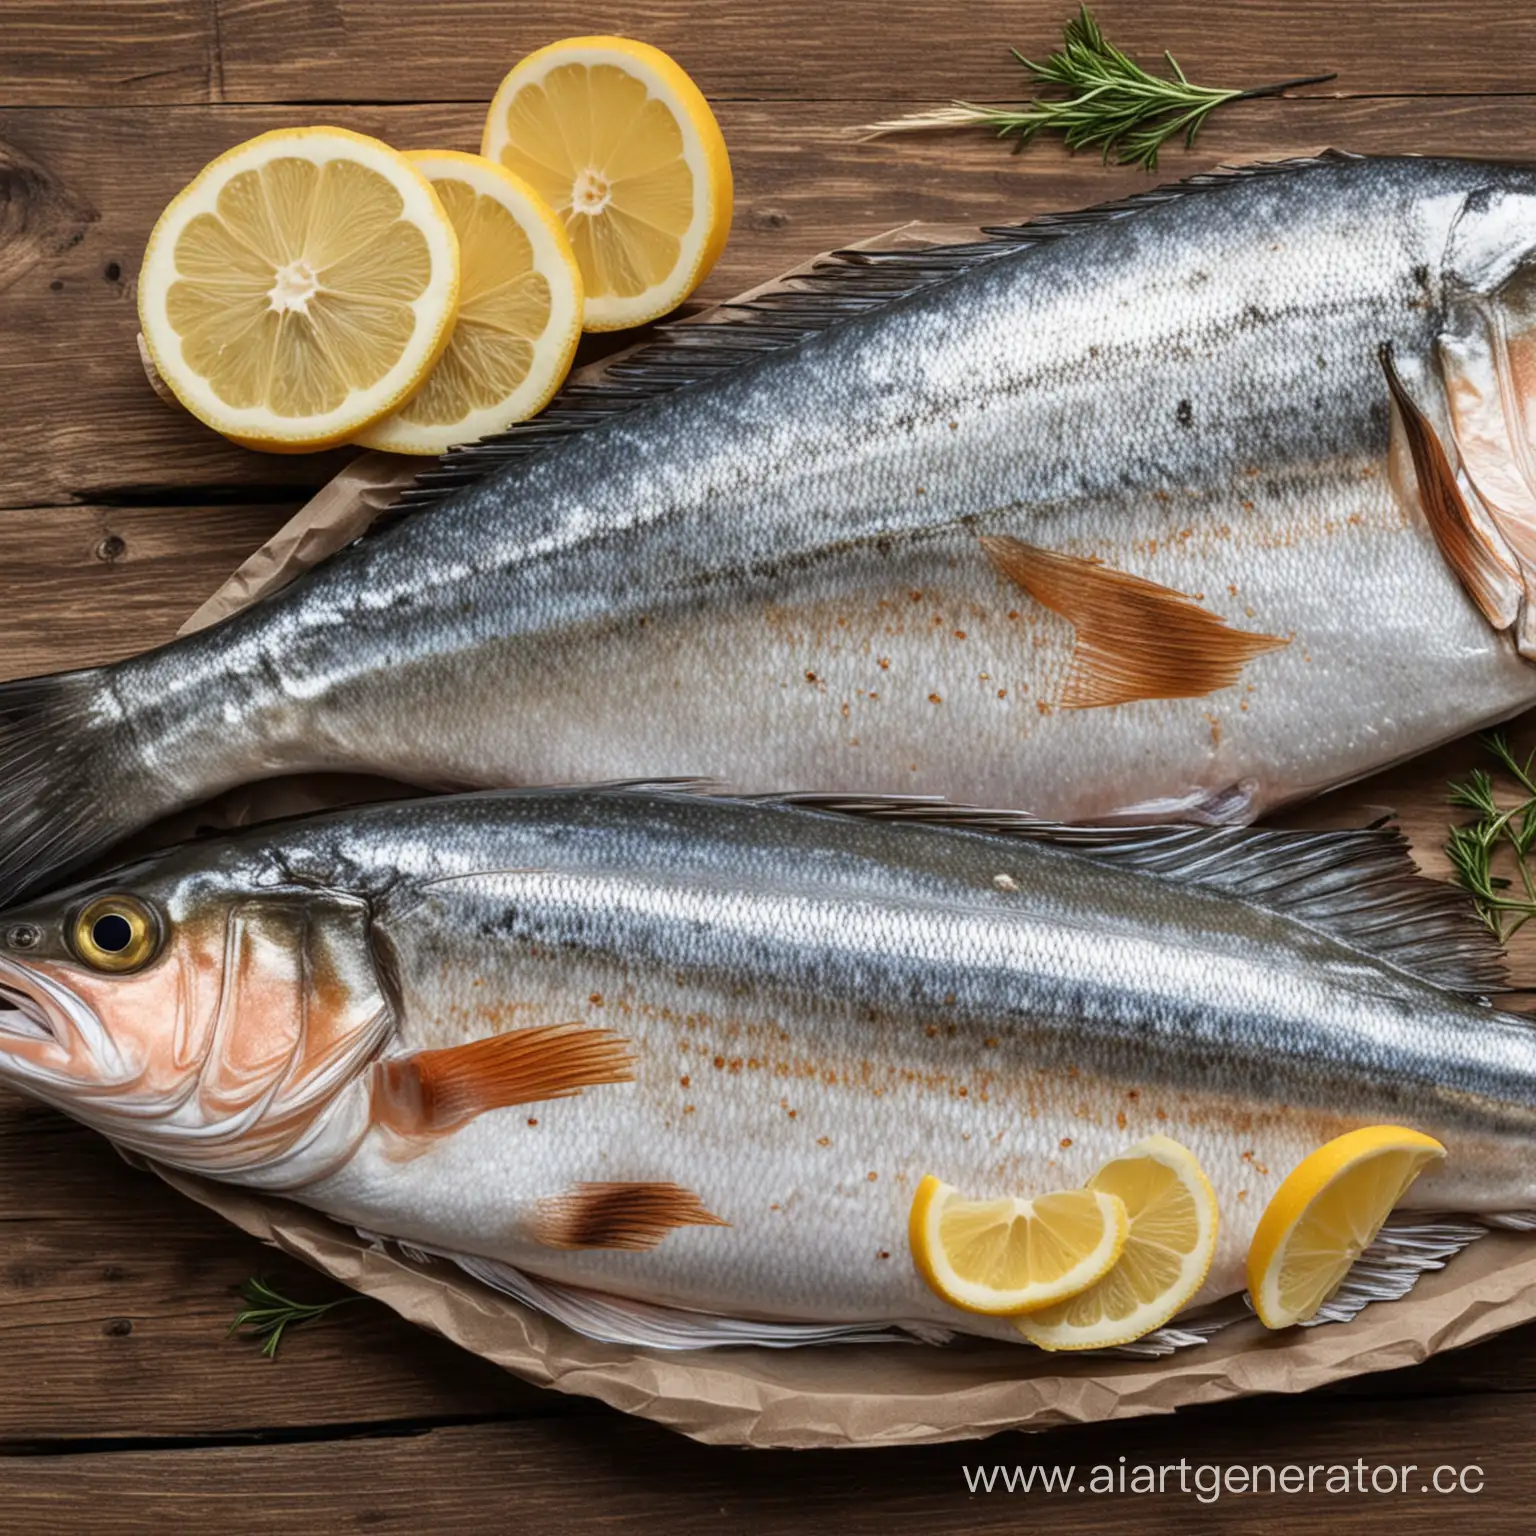 Eating fish: how healthy is it really?
